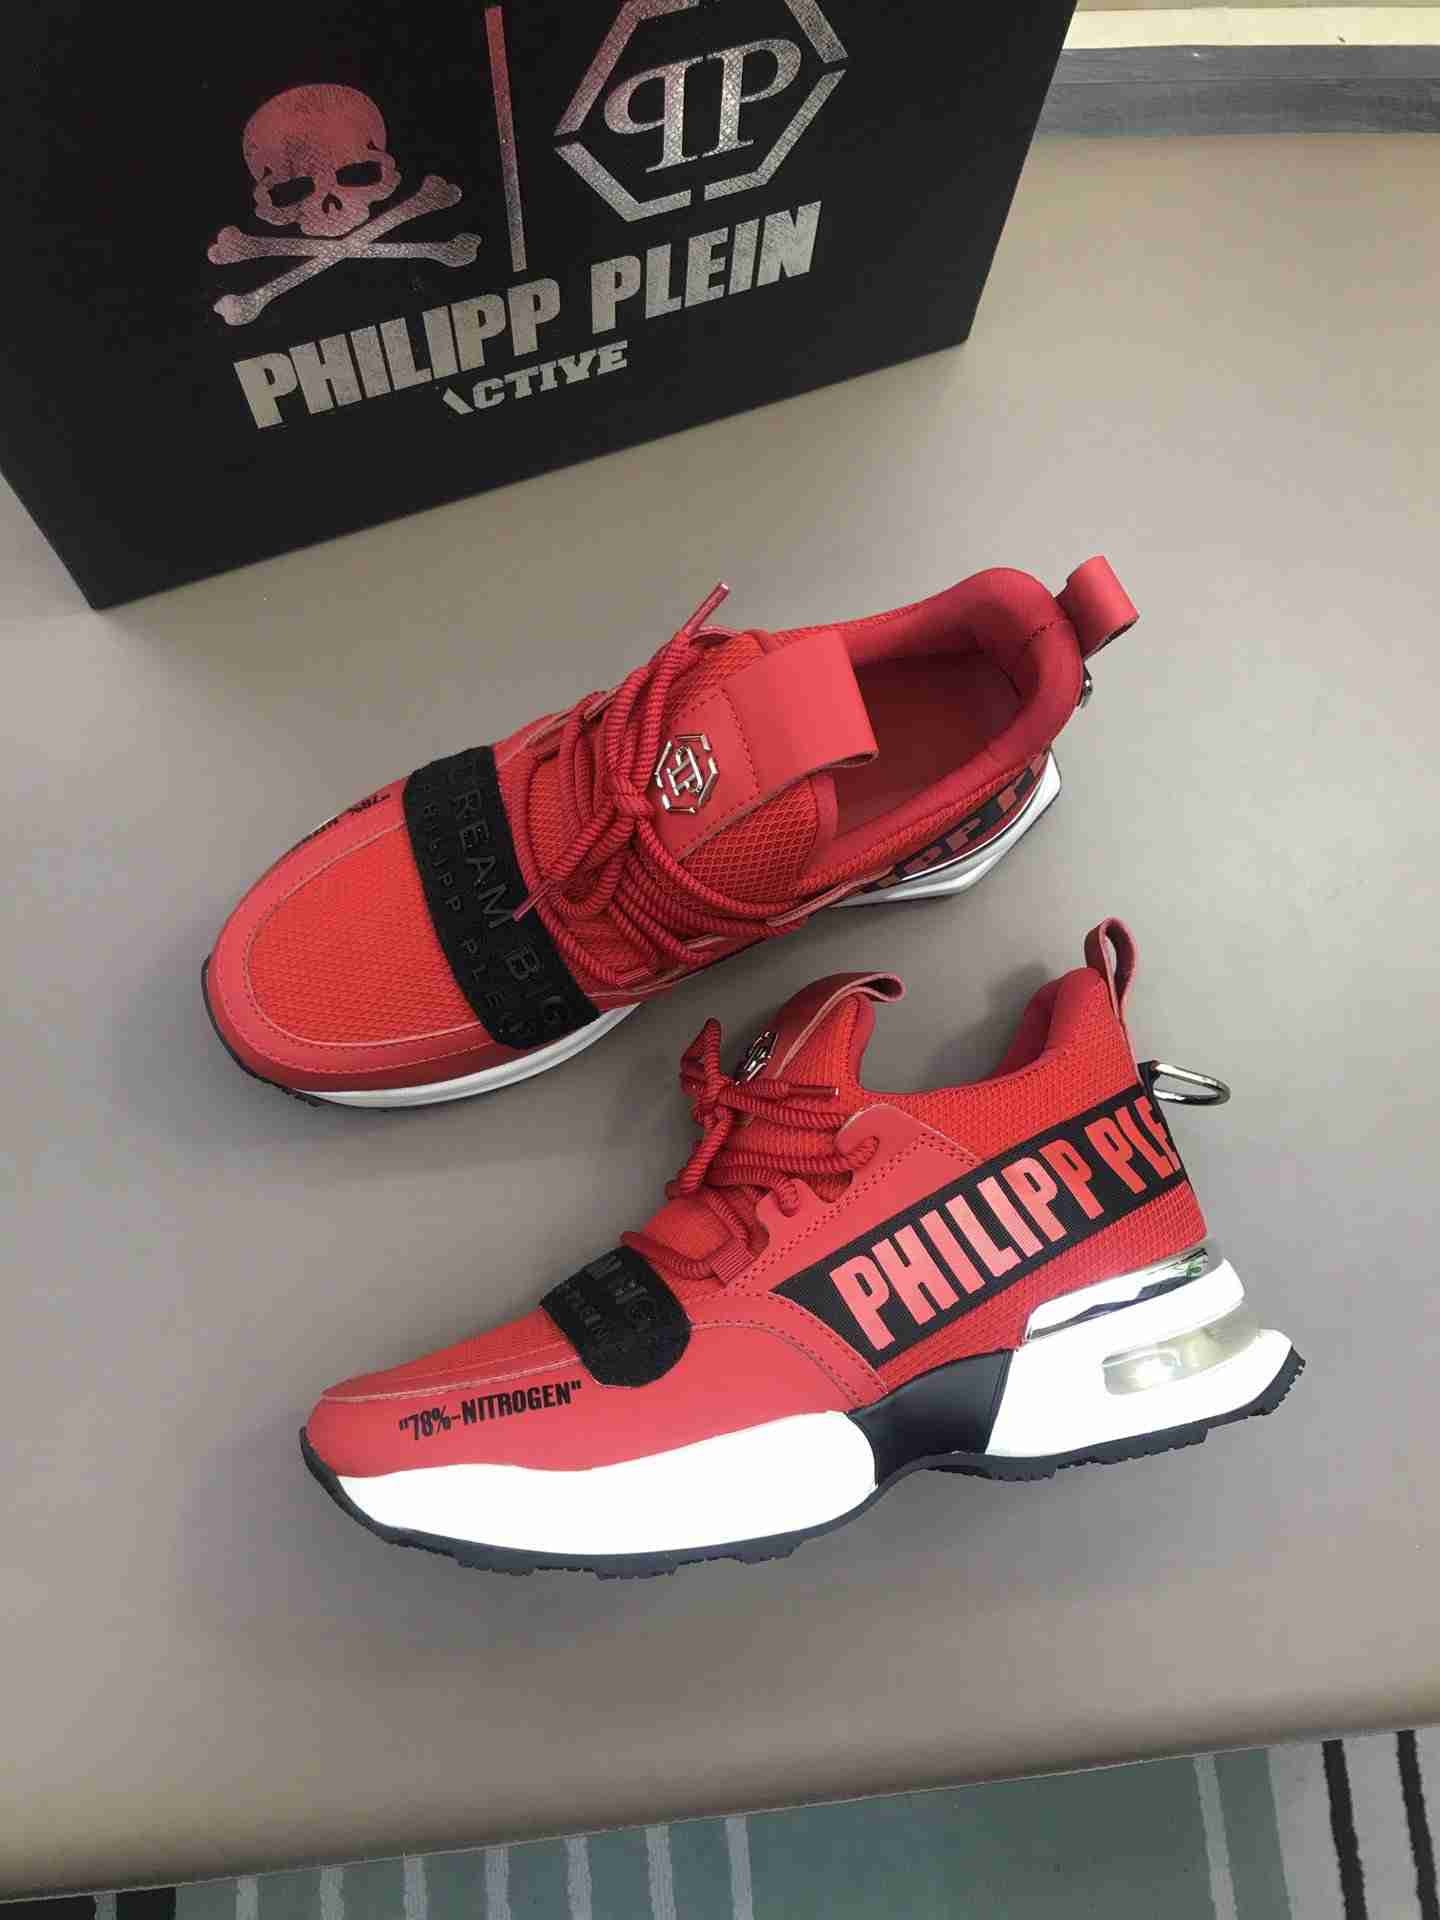 PP Woman's Men's 2021 New Fashion Casual Shoes Sneaker Sport Running-1